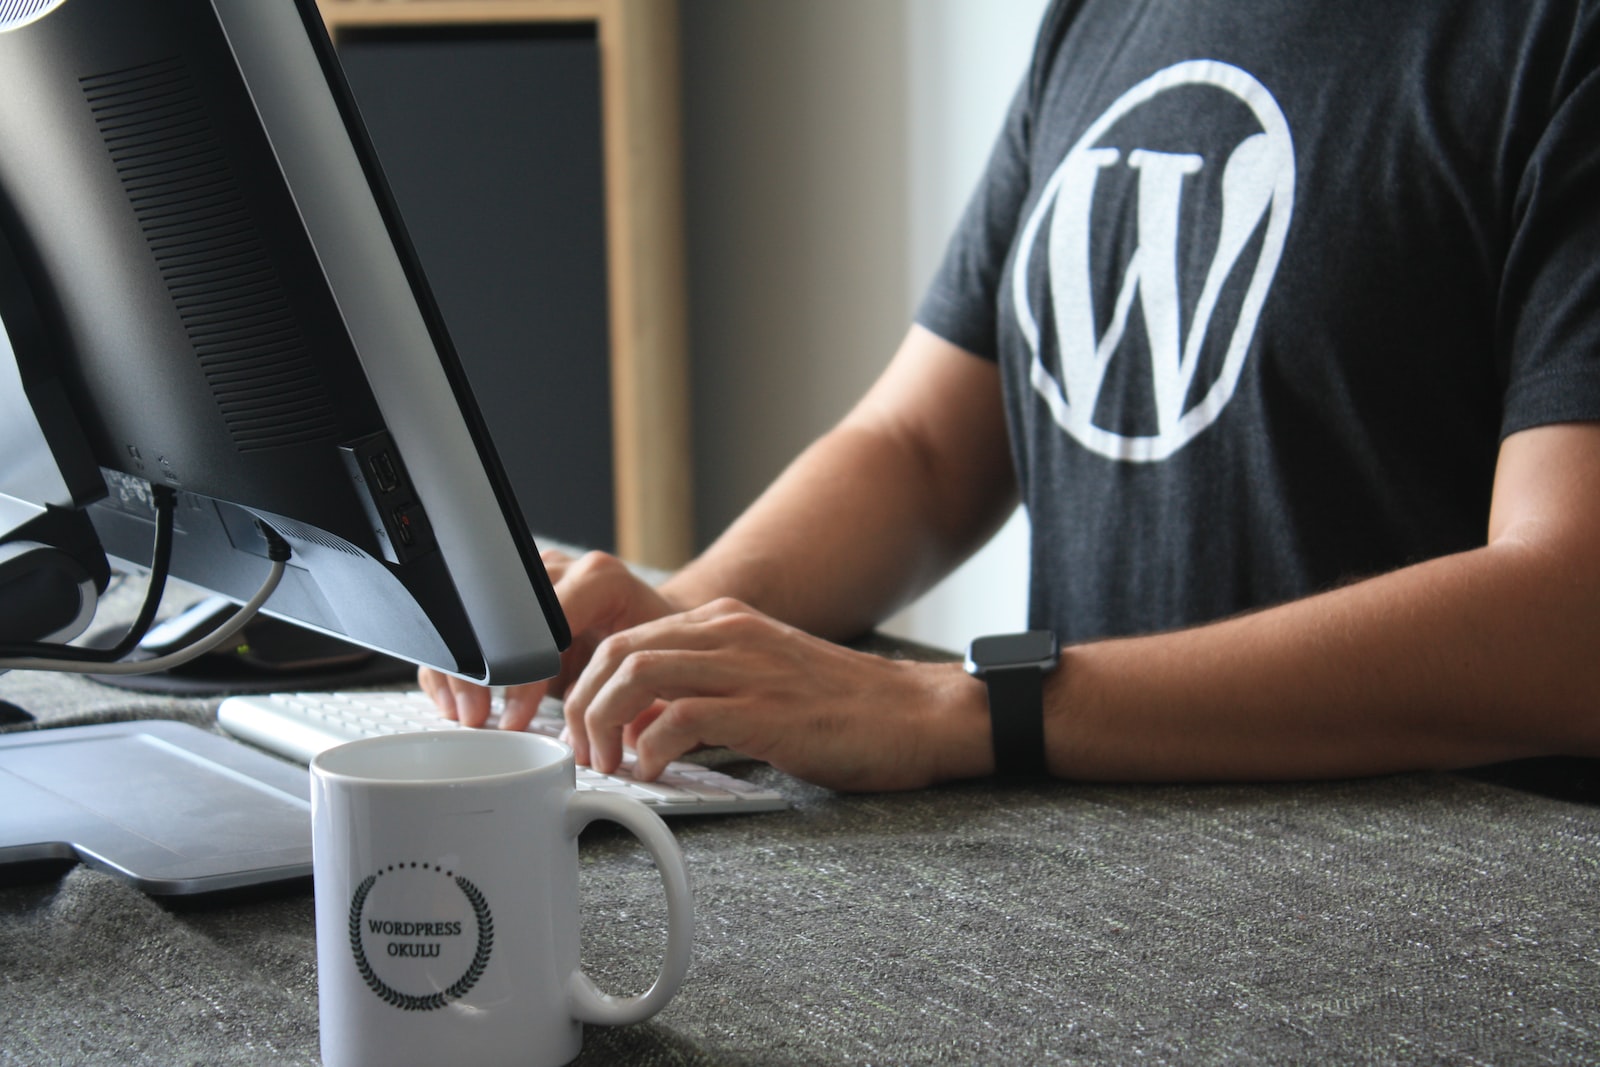 Featured image for “Understanding the Types of WordPress Support Services Offered by White Label Providers”